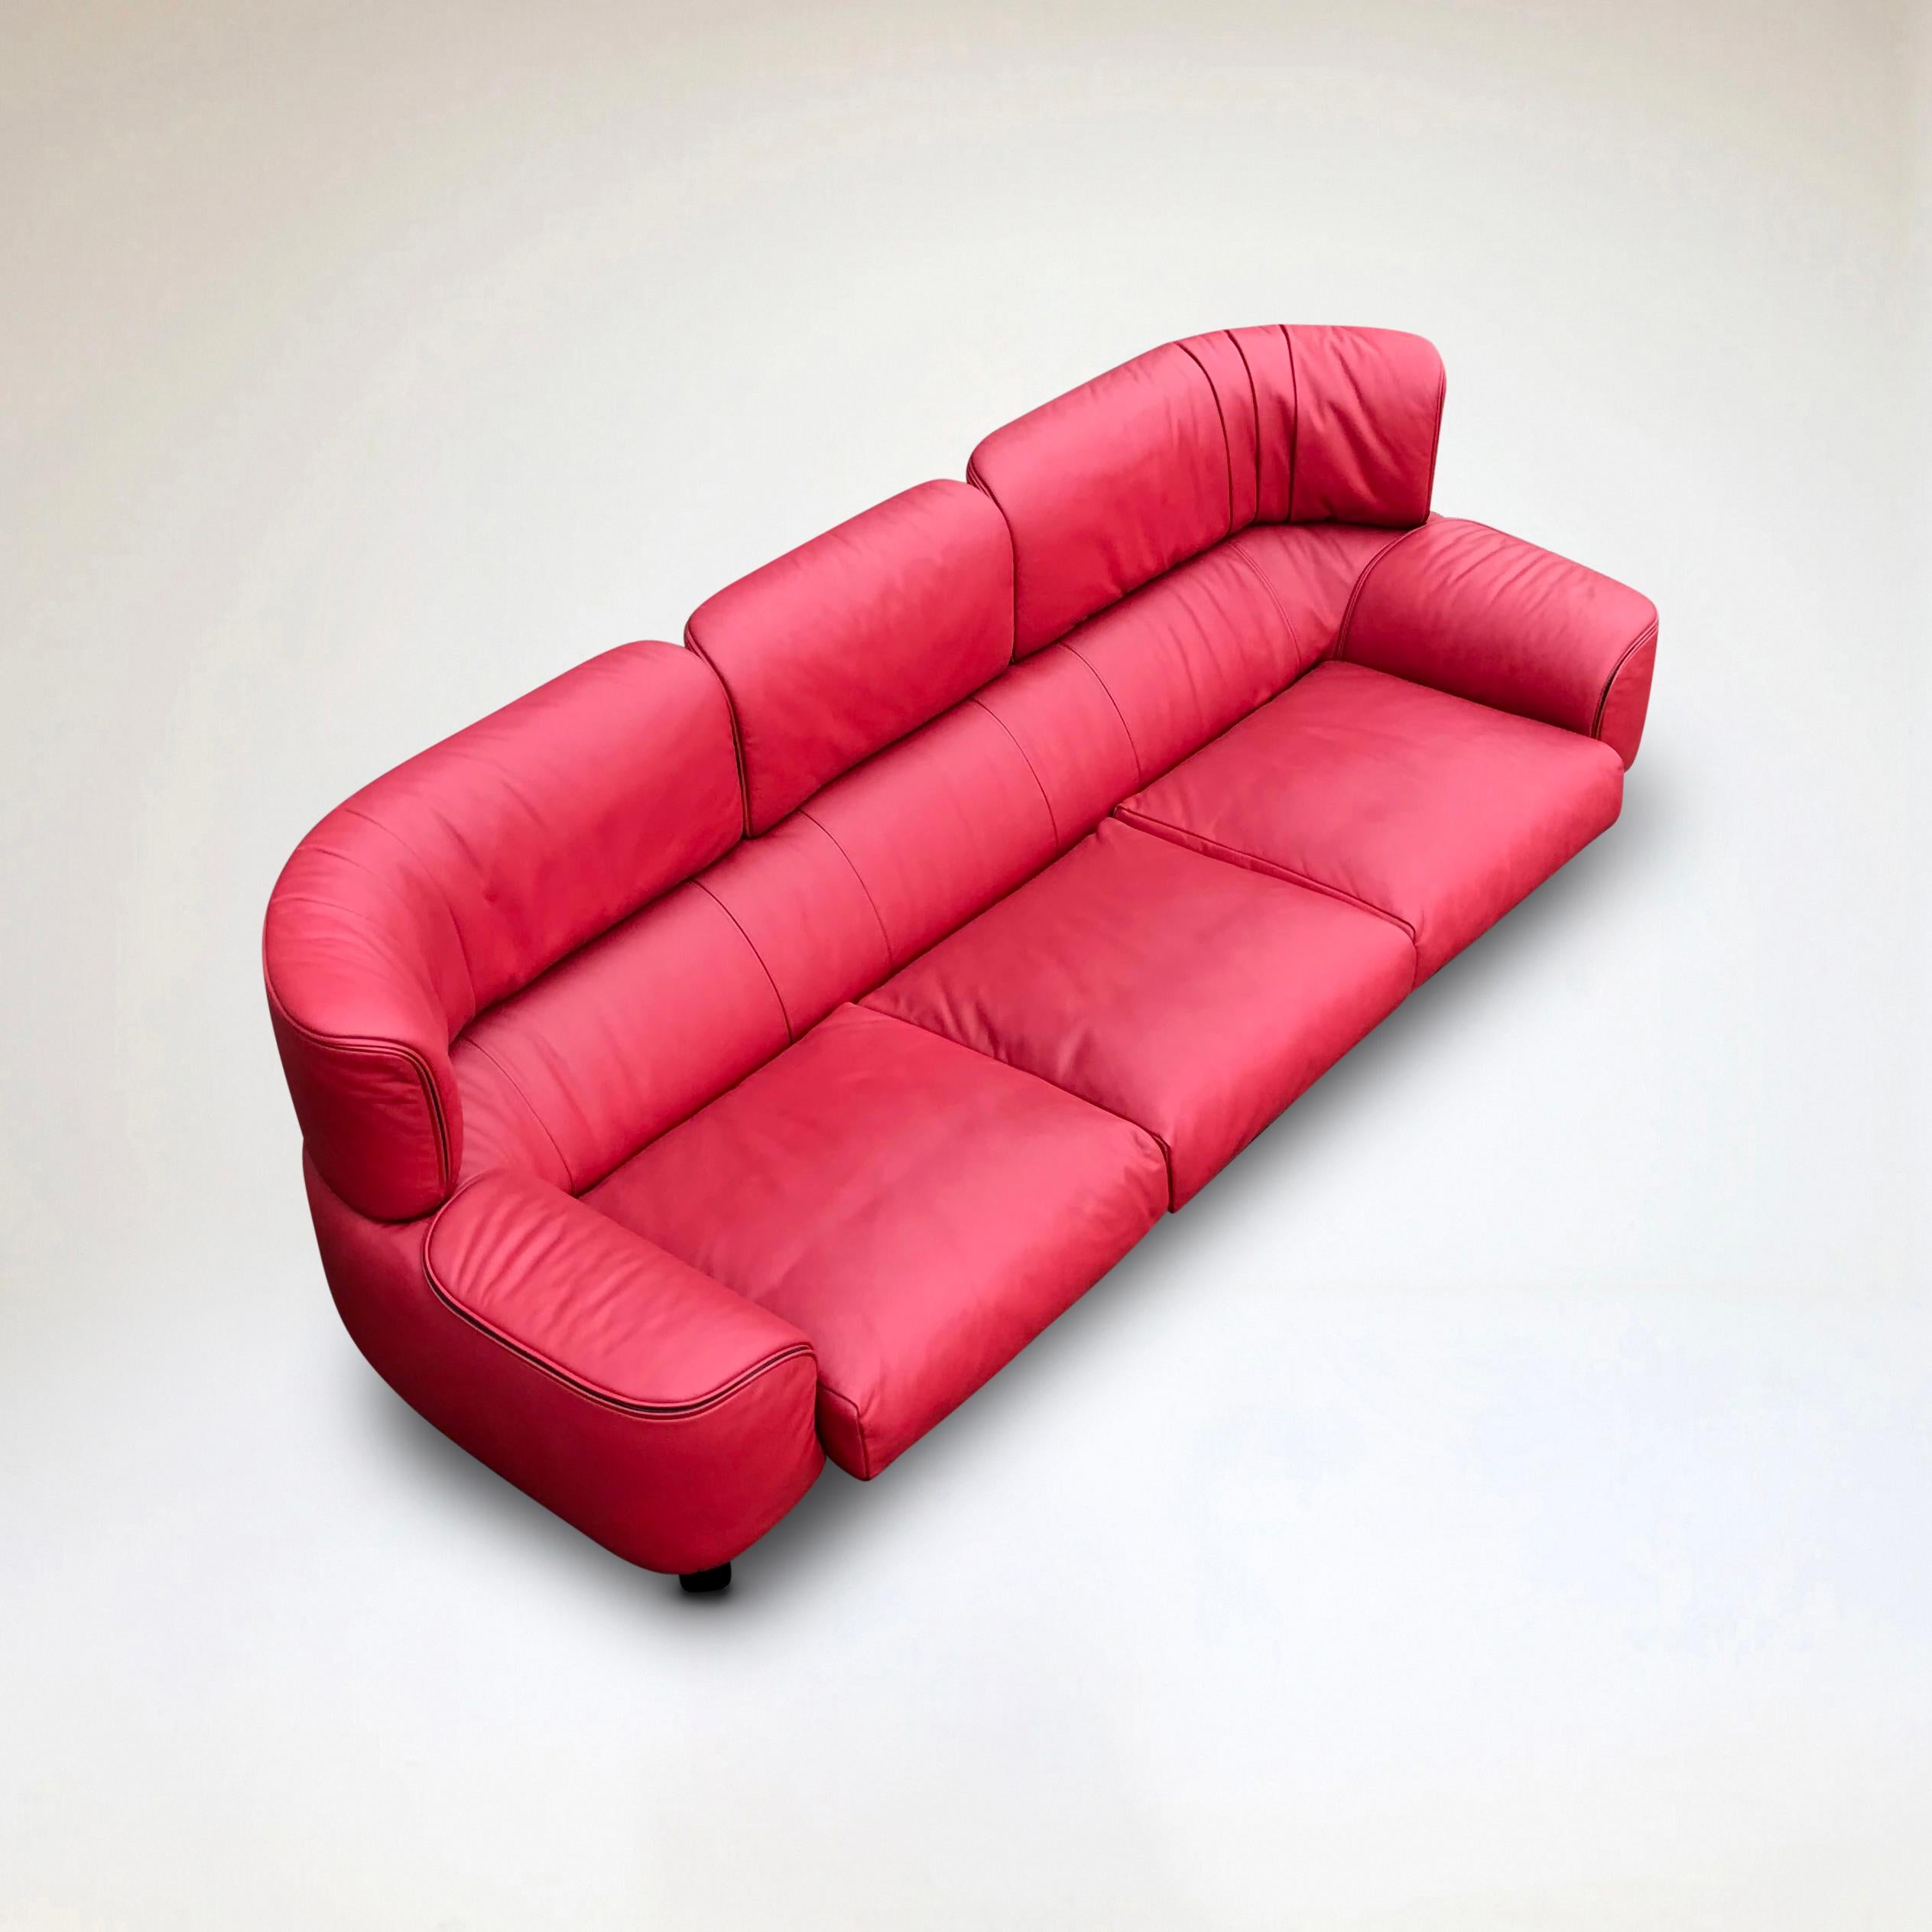 Italian Bull 3-seater red leather sofa by Gianfranco Frattini for Cassina 1987 For Sale